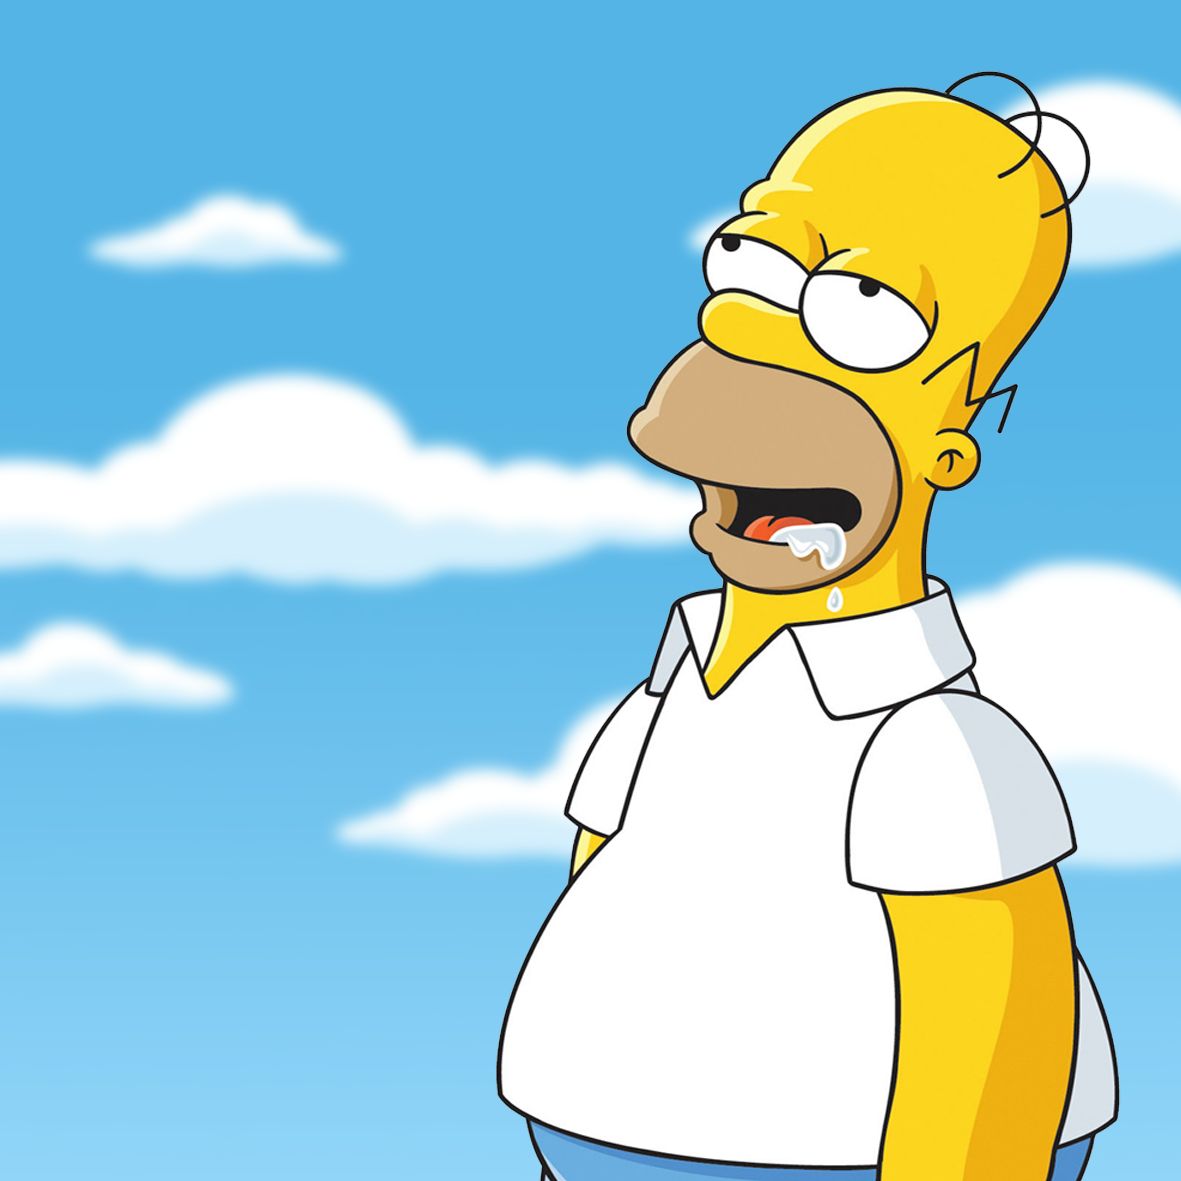 No "Homer drooling" memes have been featured yet. 